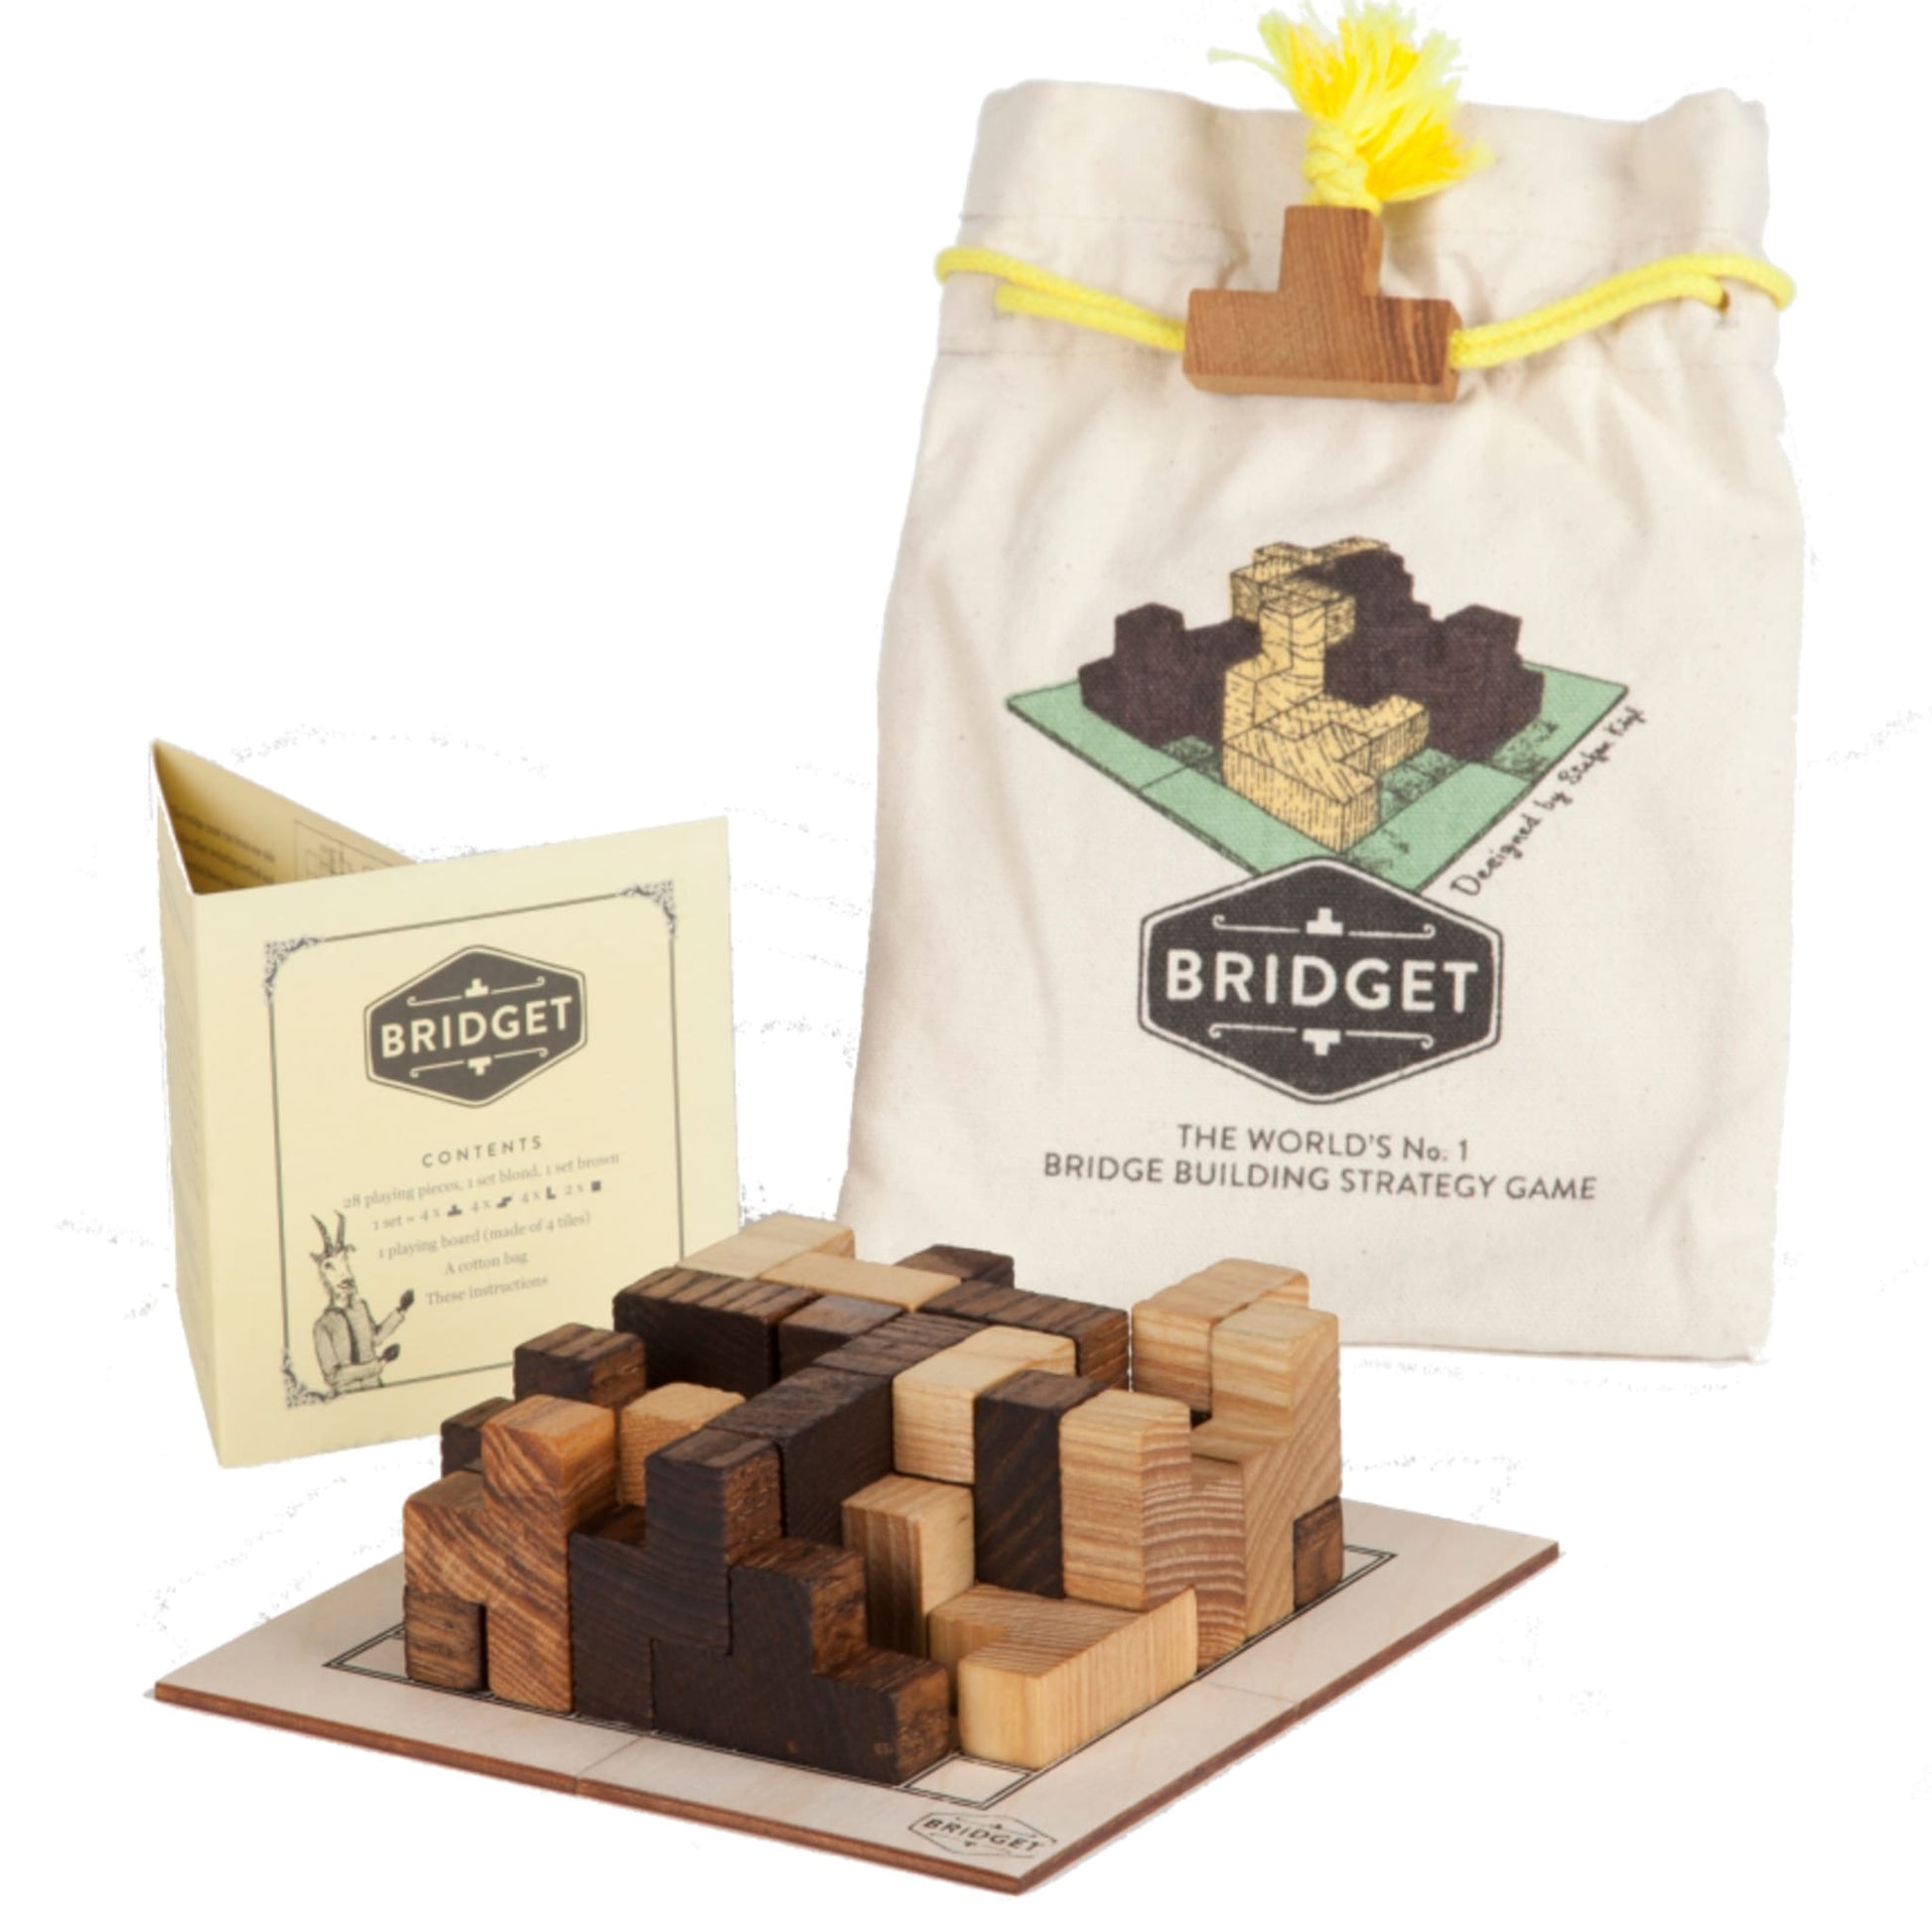 Bridget board game - Fair Trade and handmade games from ET Games